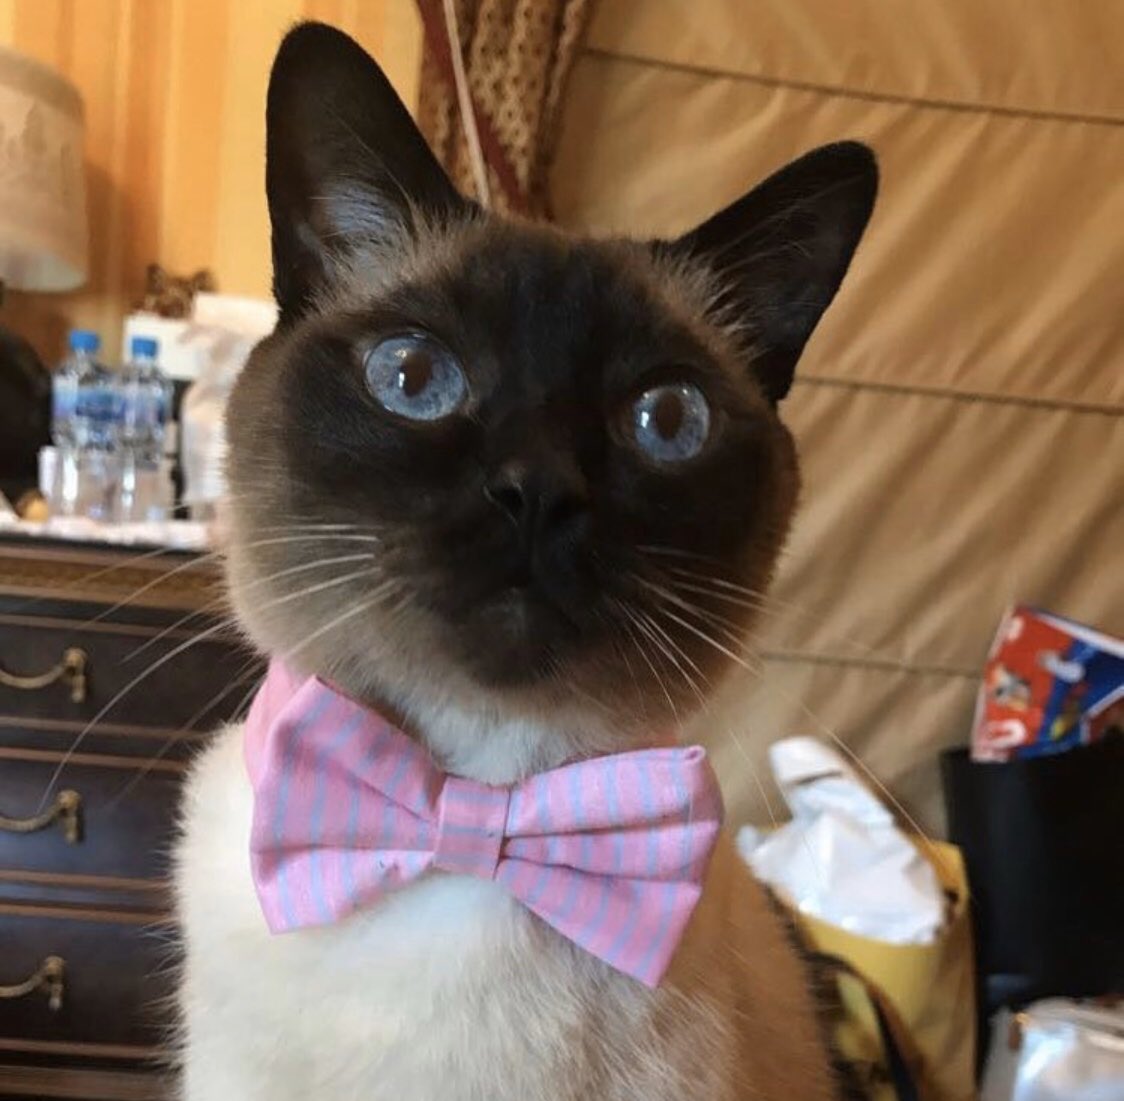 Bernard trying  his best bow tie, for when he takes me out to dinner..  #siamesecats #teammeezer# #mummysboy #mondayvibes #CatsOfTwitter ❤️❤️😻😻😽😽💞💞💞